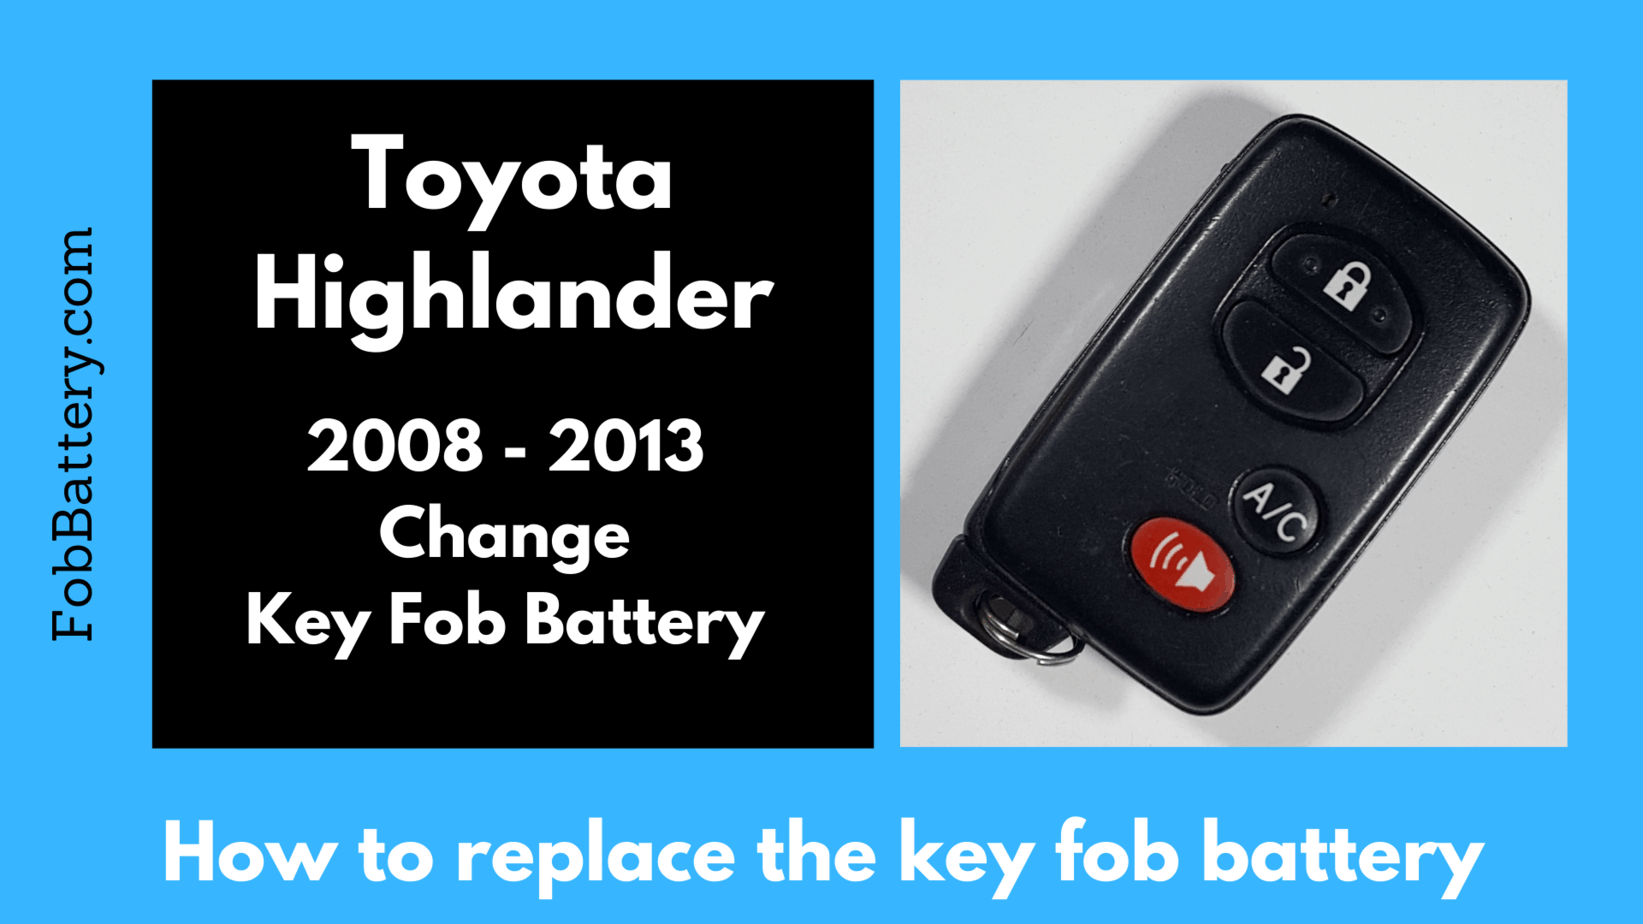 Toyota Highlander key fob battery replacement.